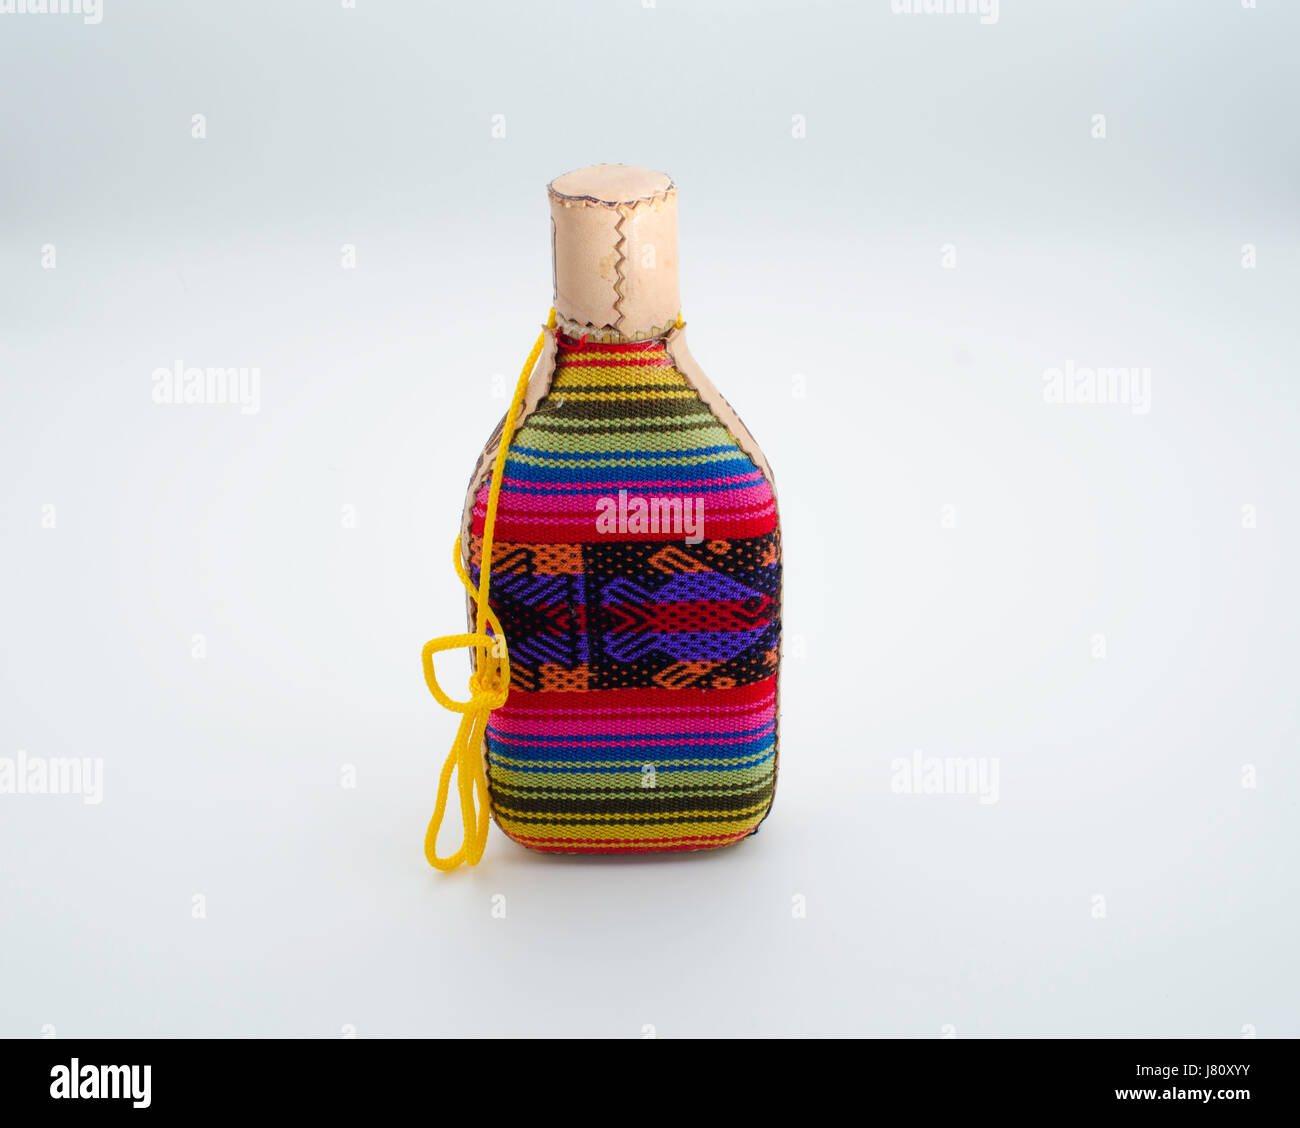 Bottle wrapped with colorful wool fabric Stock Photo